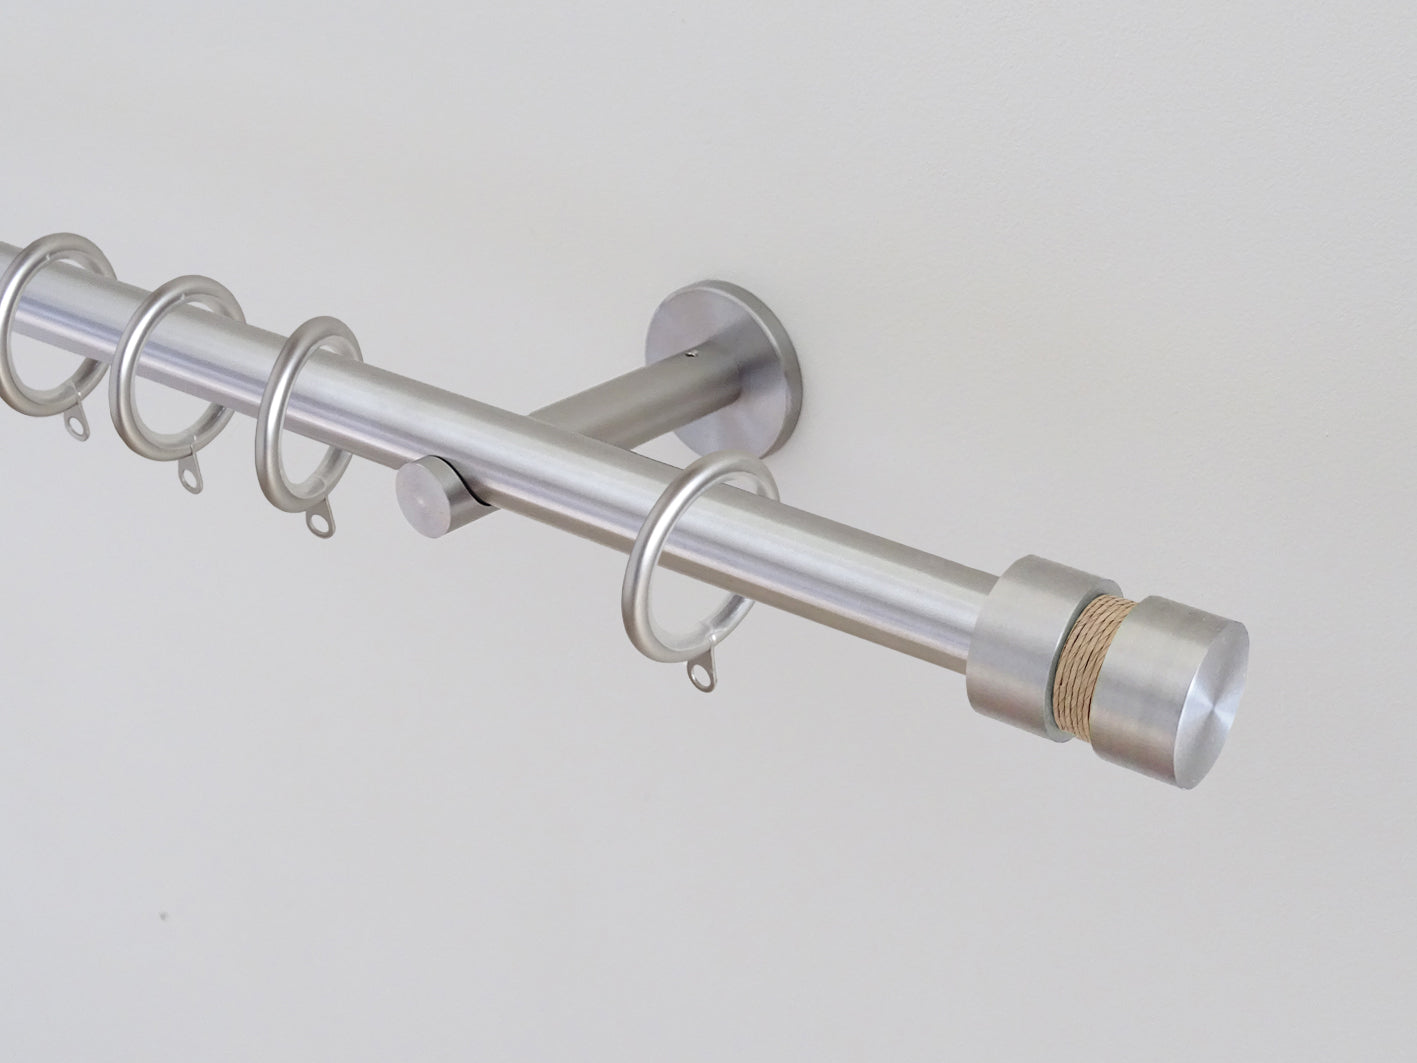 19mm diameter stainless steel metal curtain pole set with groove finials